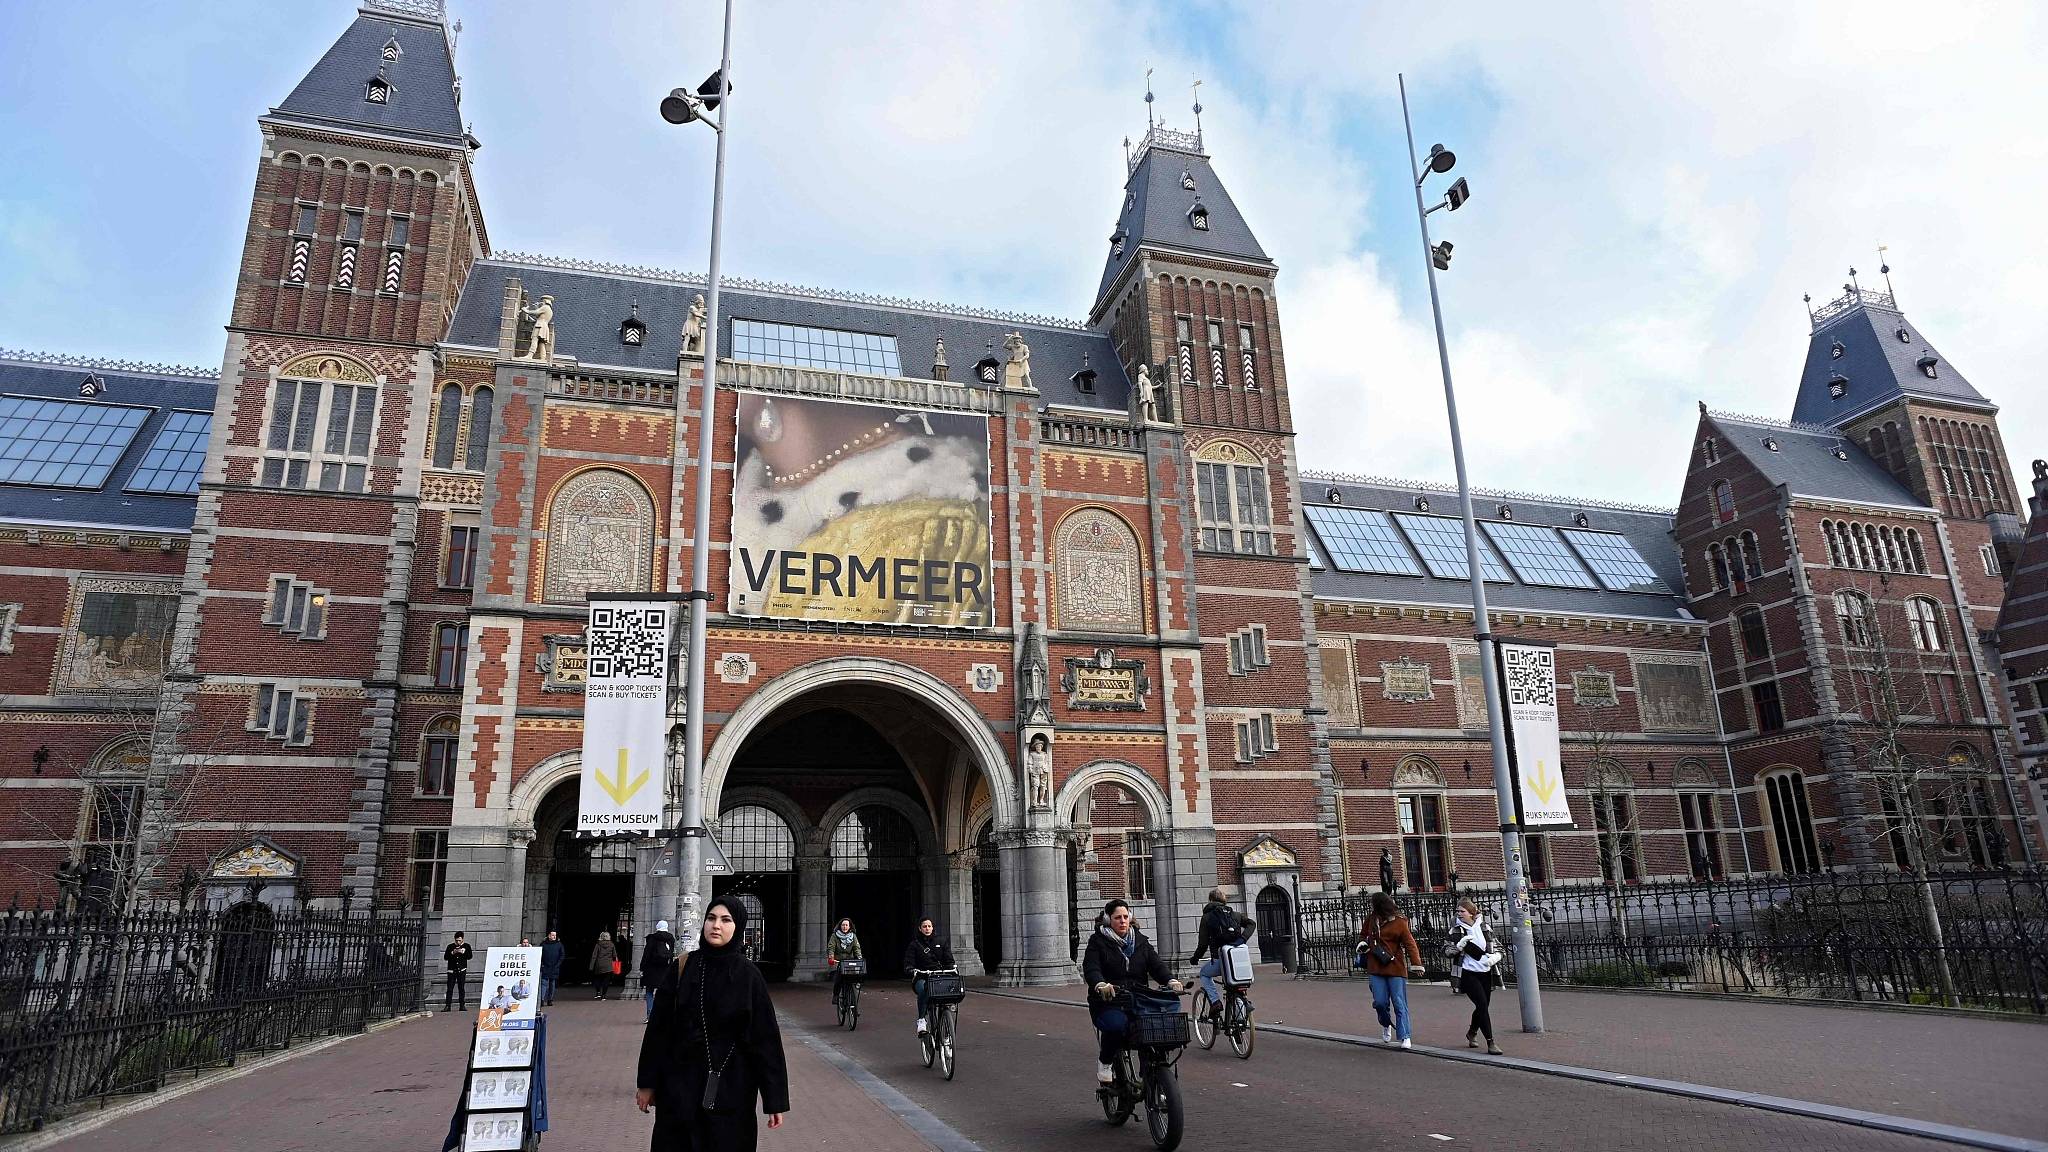 The $500,000 parking space is a stone's throw from the Rijksmuseum. /CFP